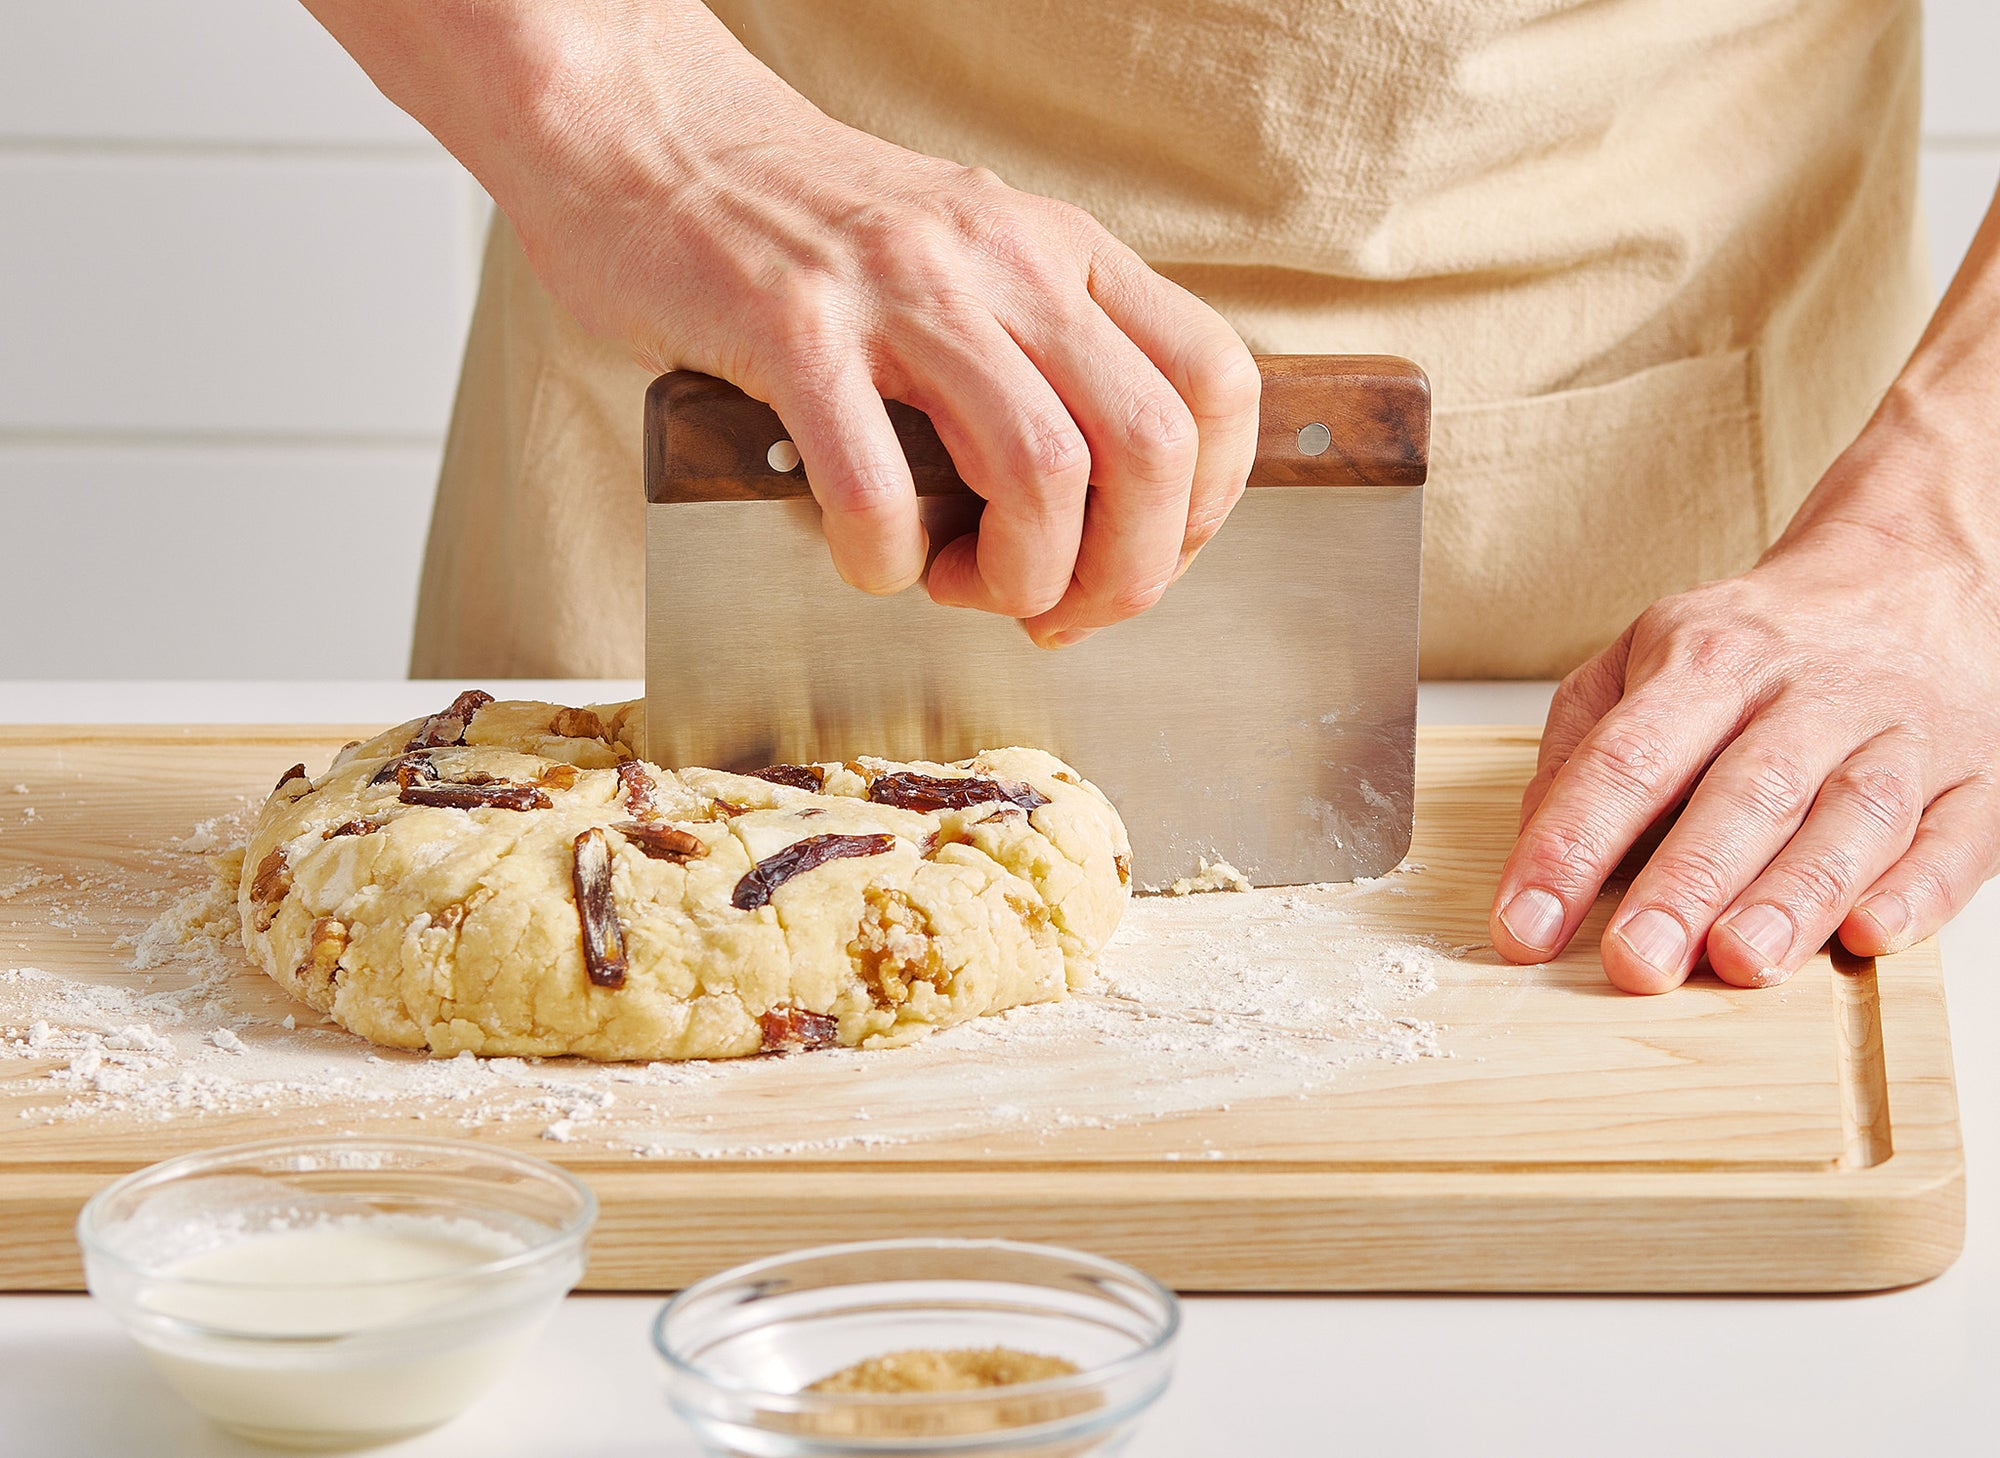 {{walnut,blue}} A pair of hands uses a Misen Bench Scraper with walnut handle to divide scone dough into even sections, working atop a Misen Wood Cutting Board.